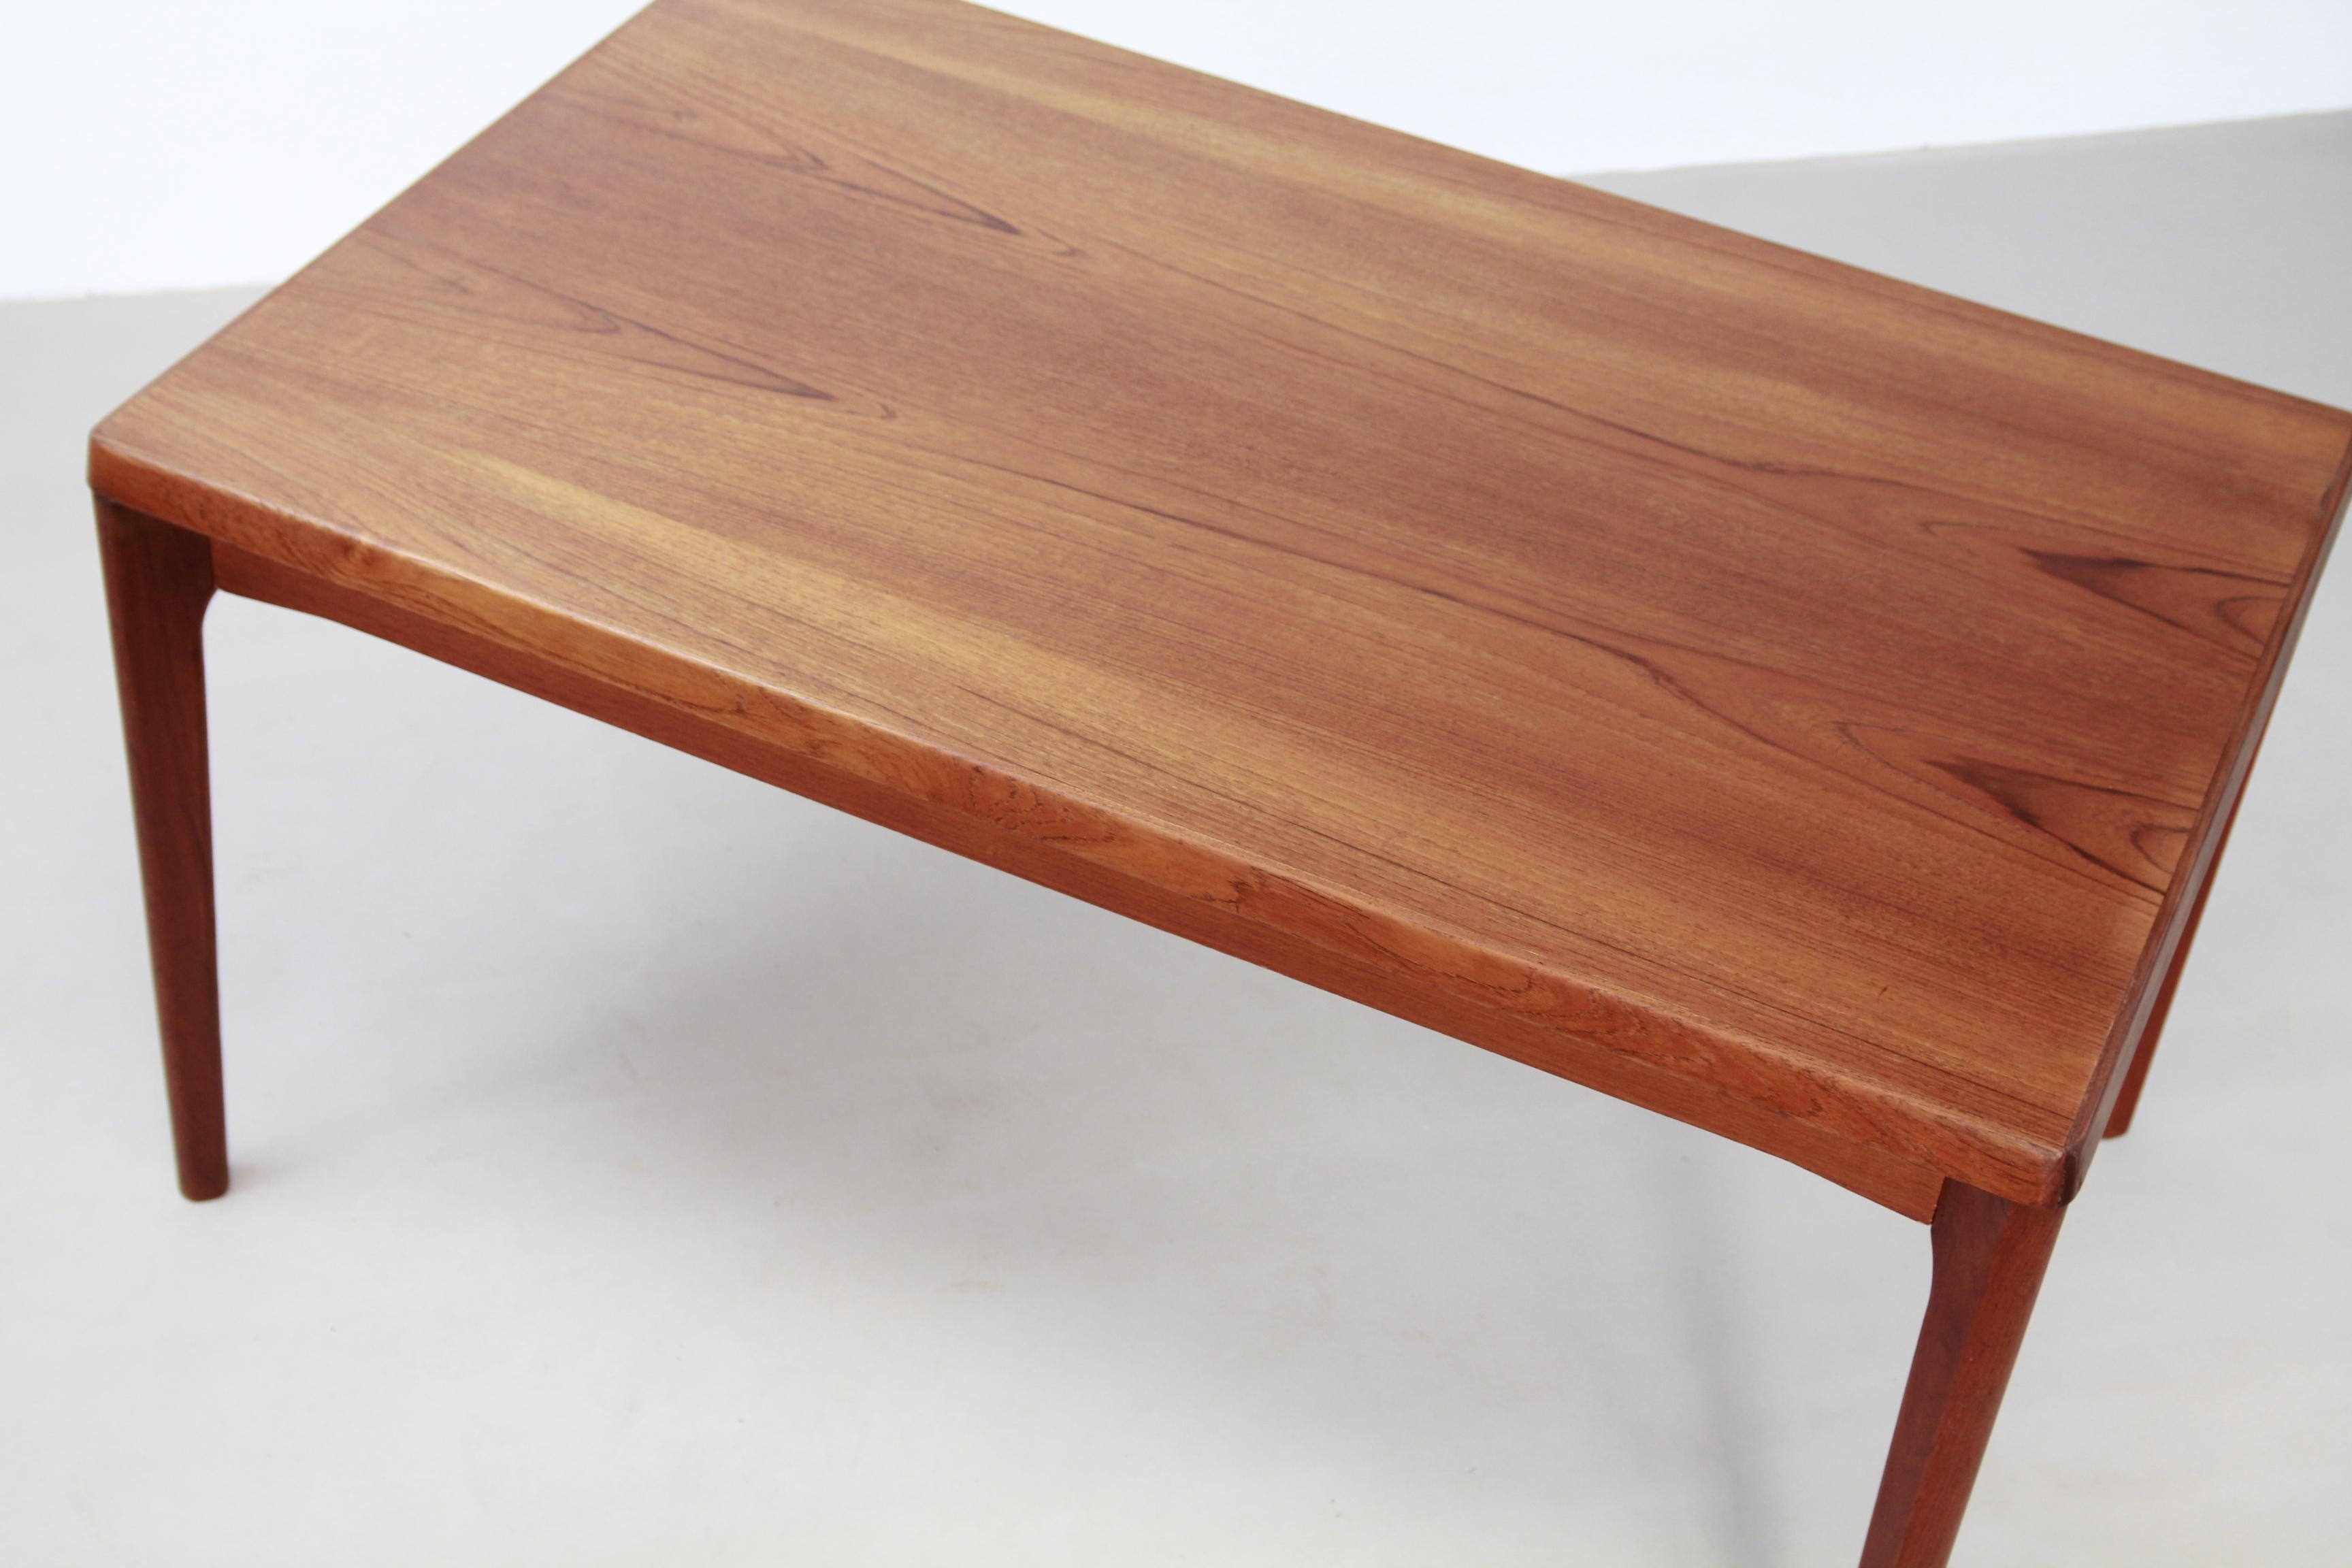 20th Century Teak Dining Table with Extensions by Henning Kjærnulf for Vejle Møbelfabrik 1960